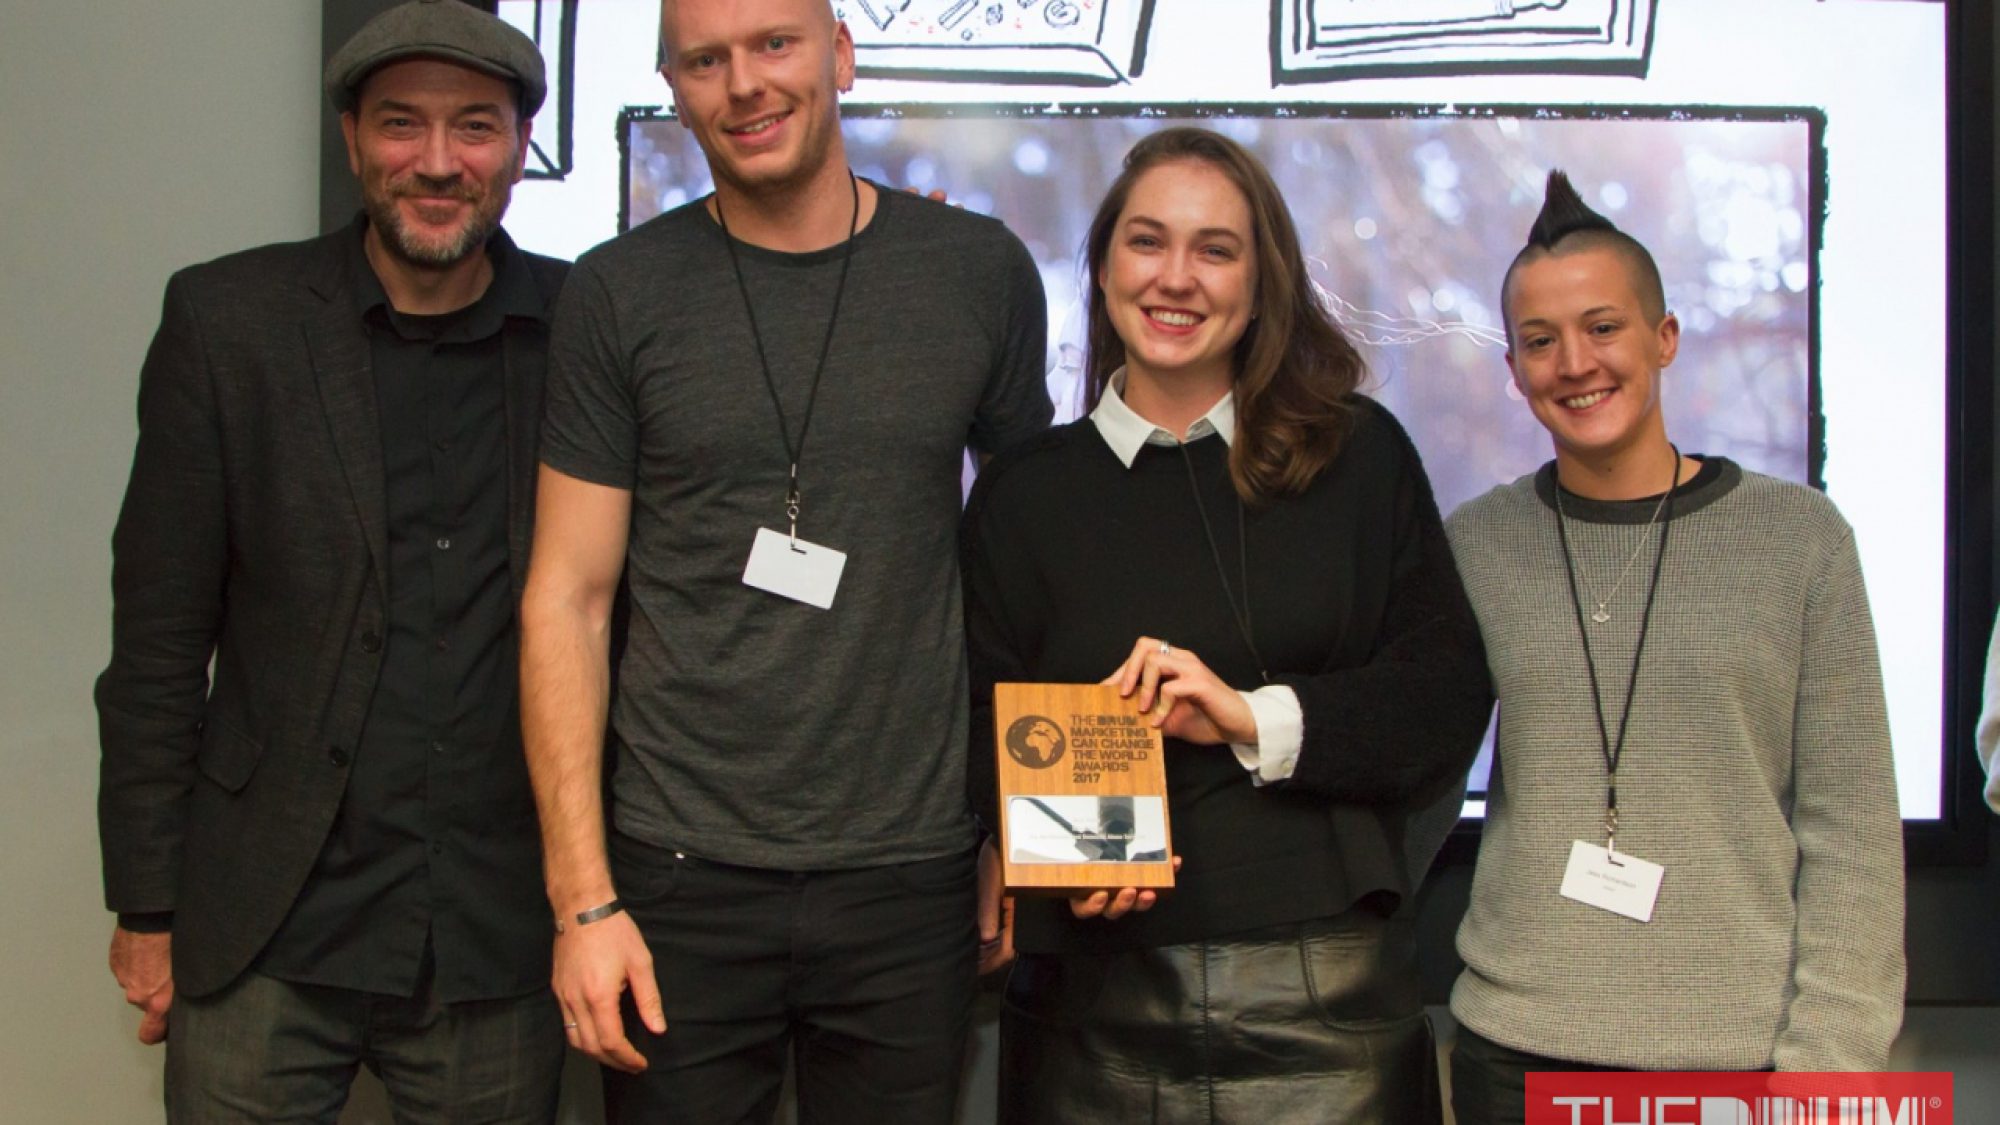 Raw London team accept creative agency award at The Drum 2017